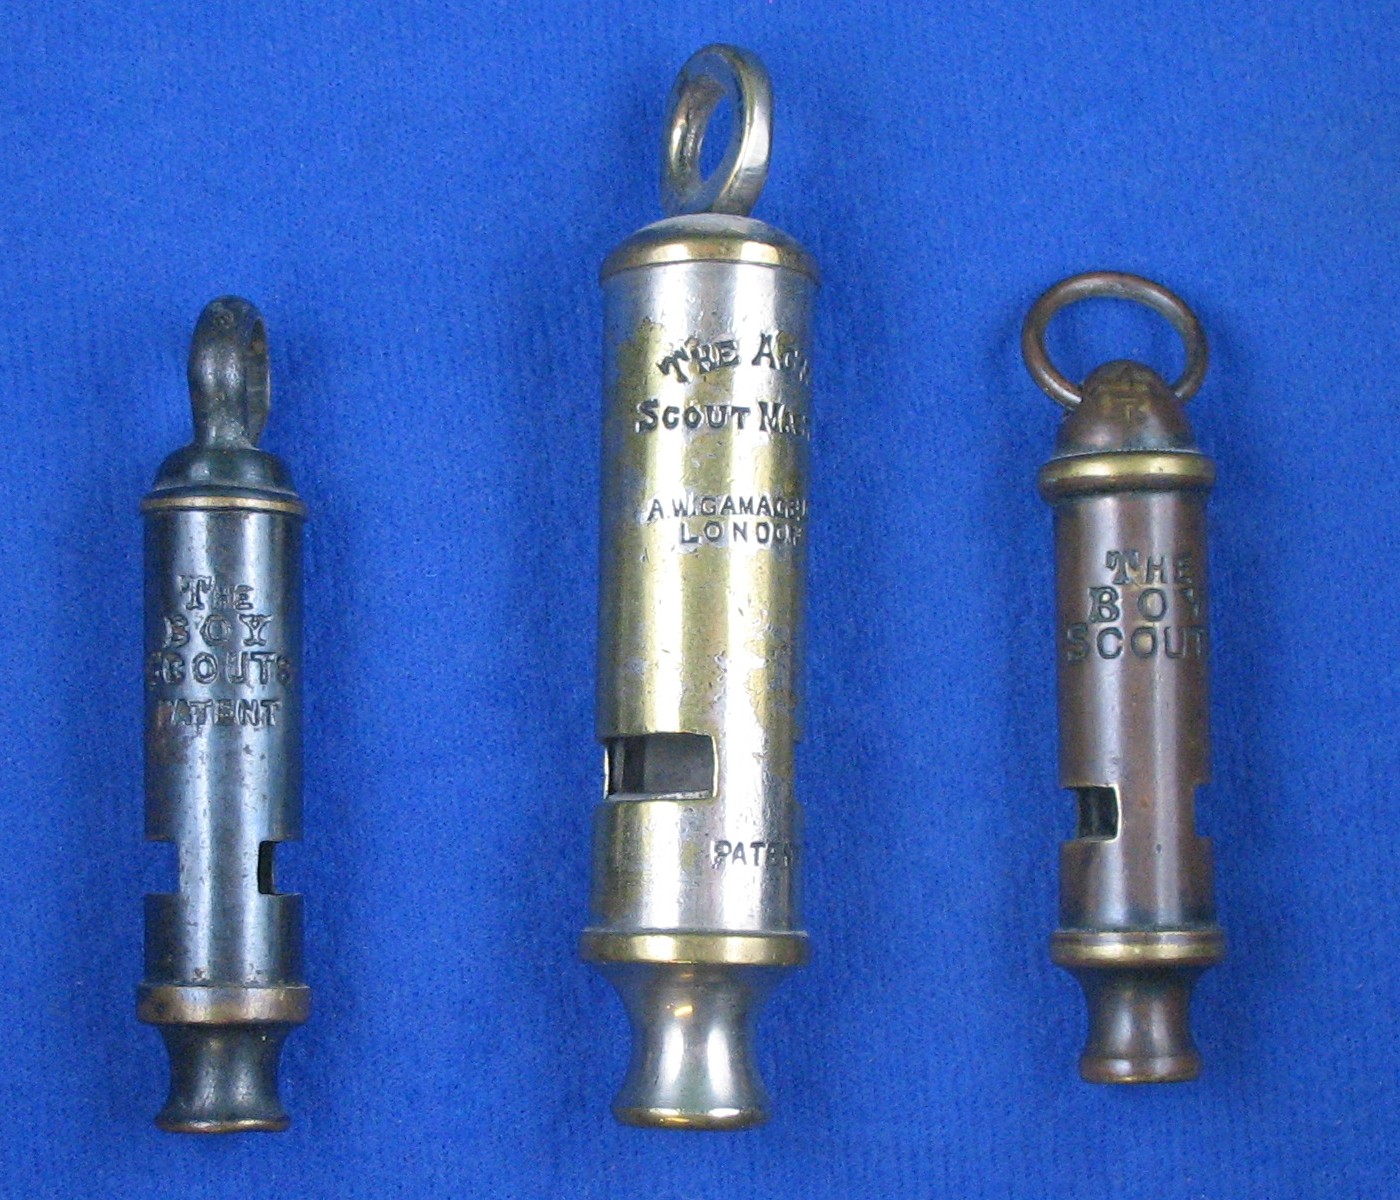 Scout Whistles